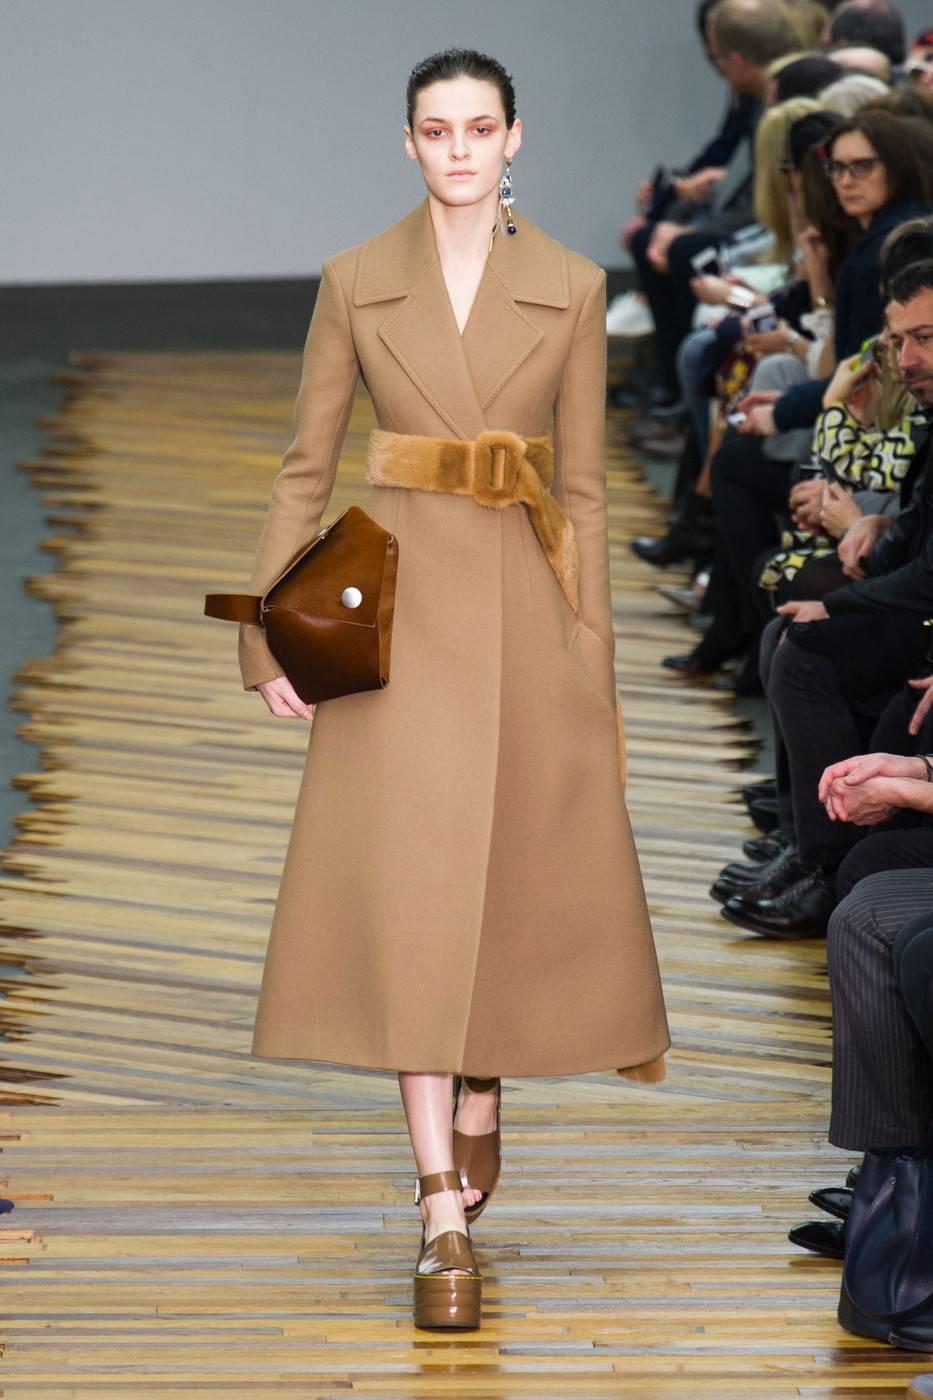 Camel wool gaberdine coat with narrow arms and flared hemline designed by Phoebe Philo for Celine exactly as seen on the fall 2014 runway. French size 40 which fits a US 6-8. Made in Italy. Fully lined. Pockets at hips. New with tags. Original